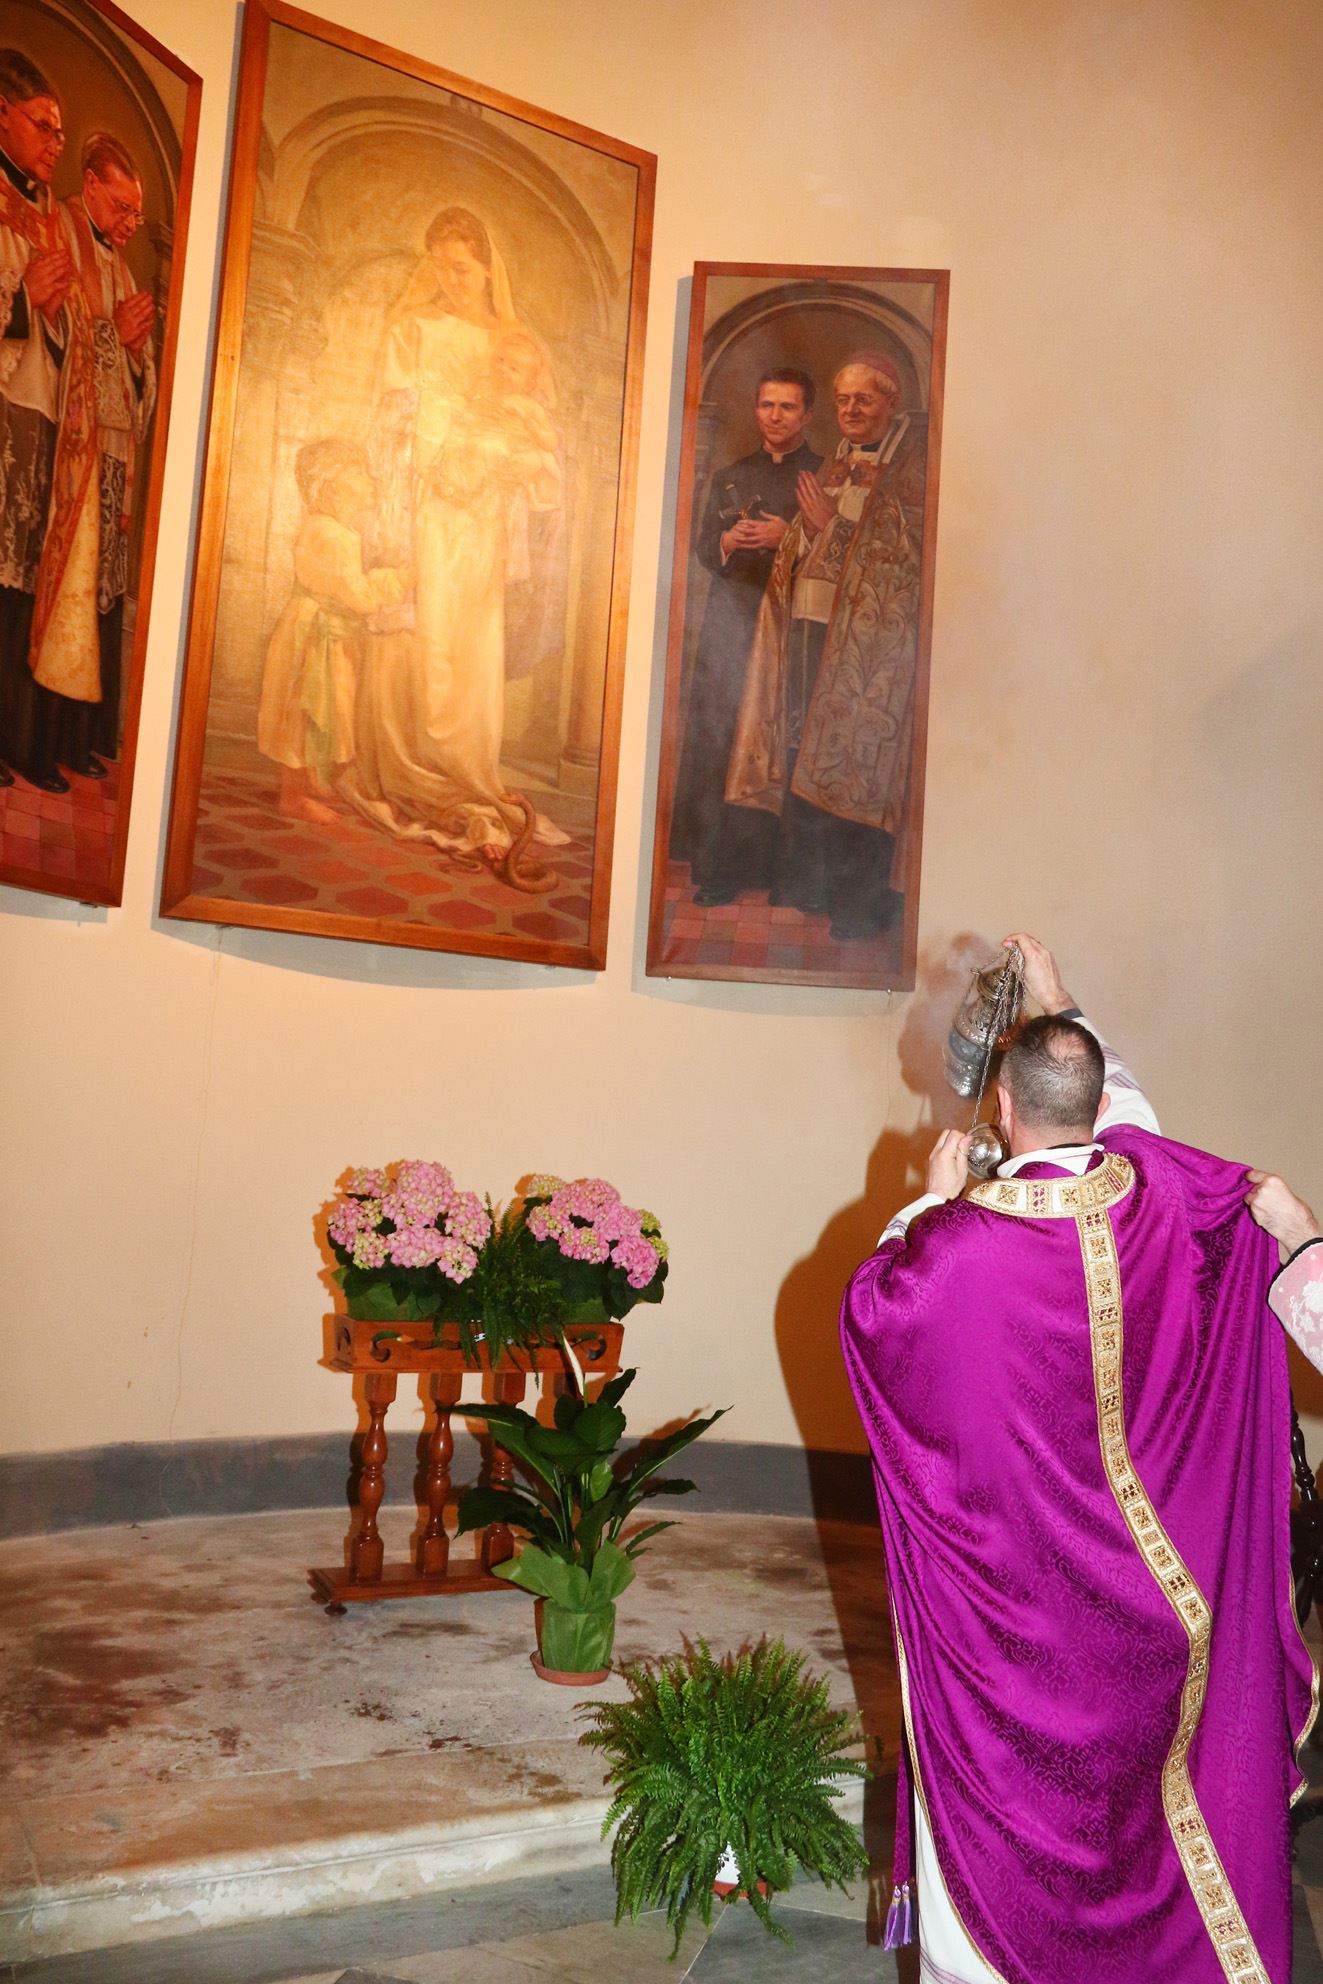 INAUGURATION OF THE TRIPTYCH OF THE MADONNA DEL SOCCORSO